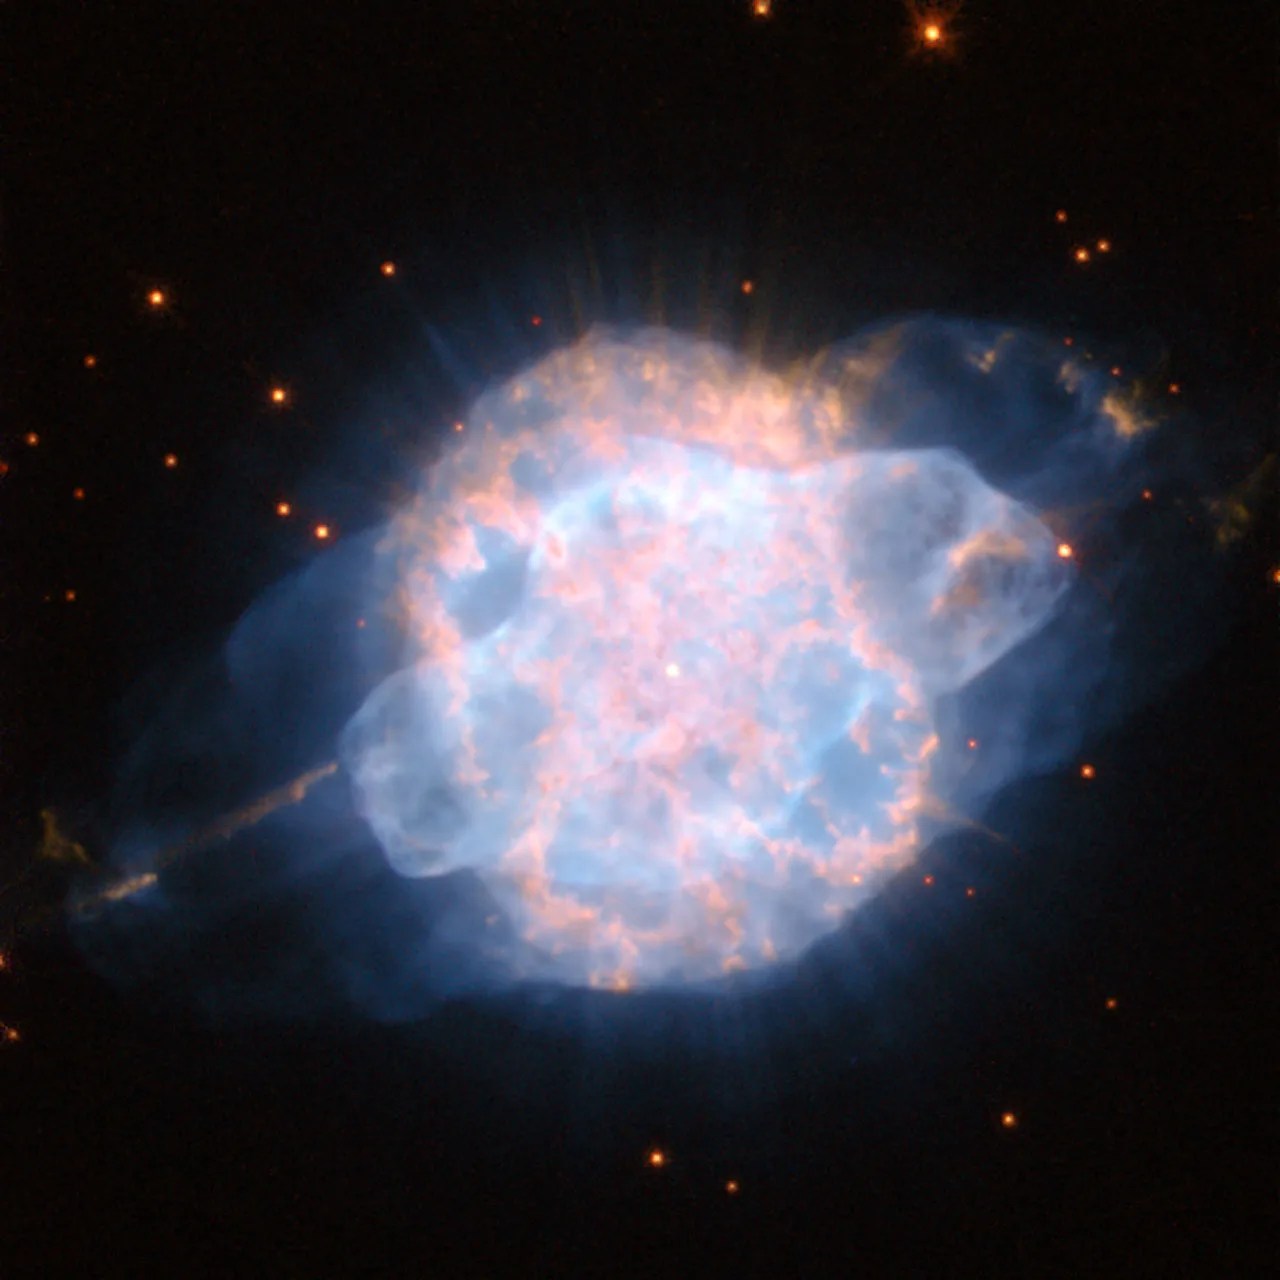 Large blue and pink blob surrounds a bright star